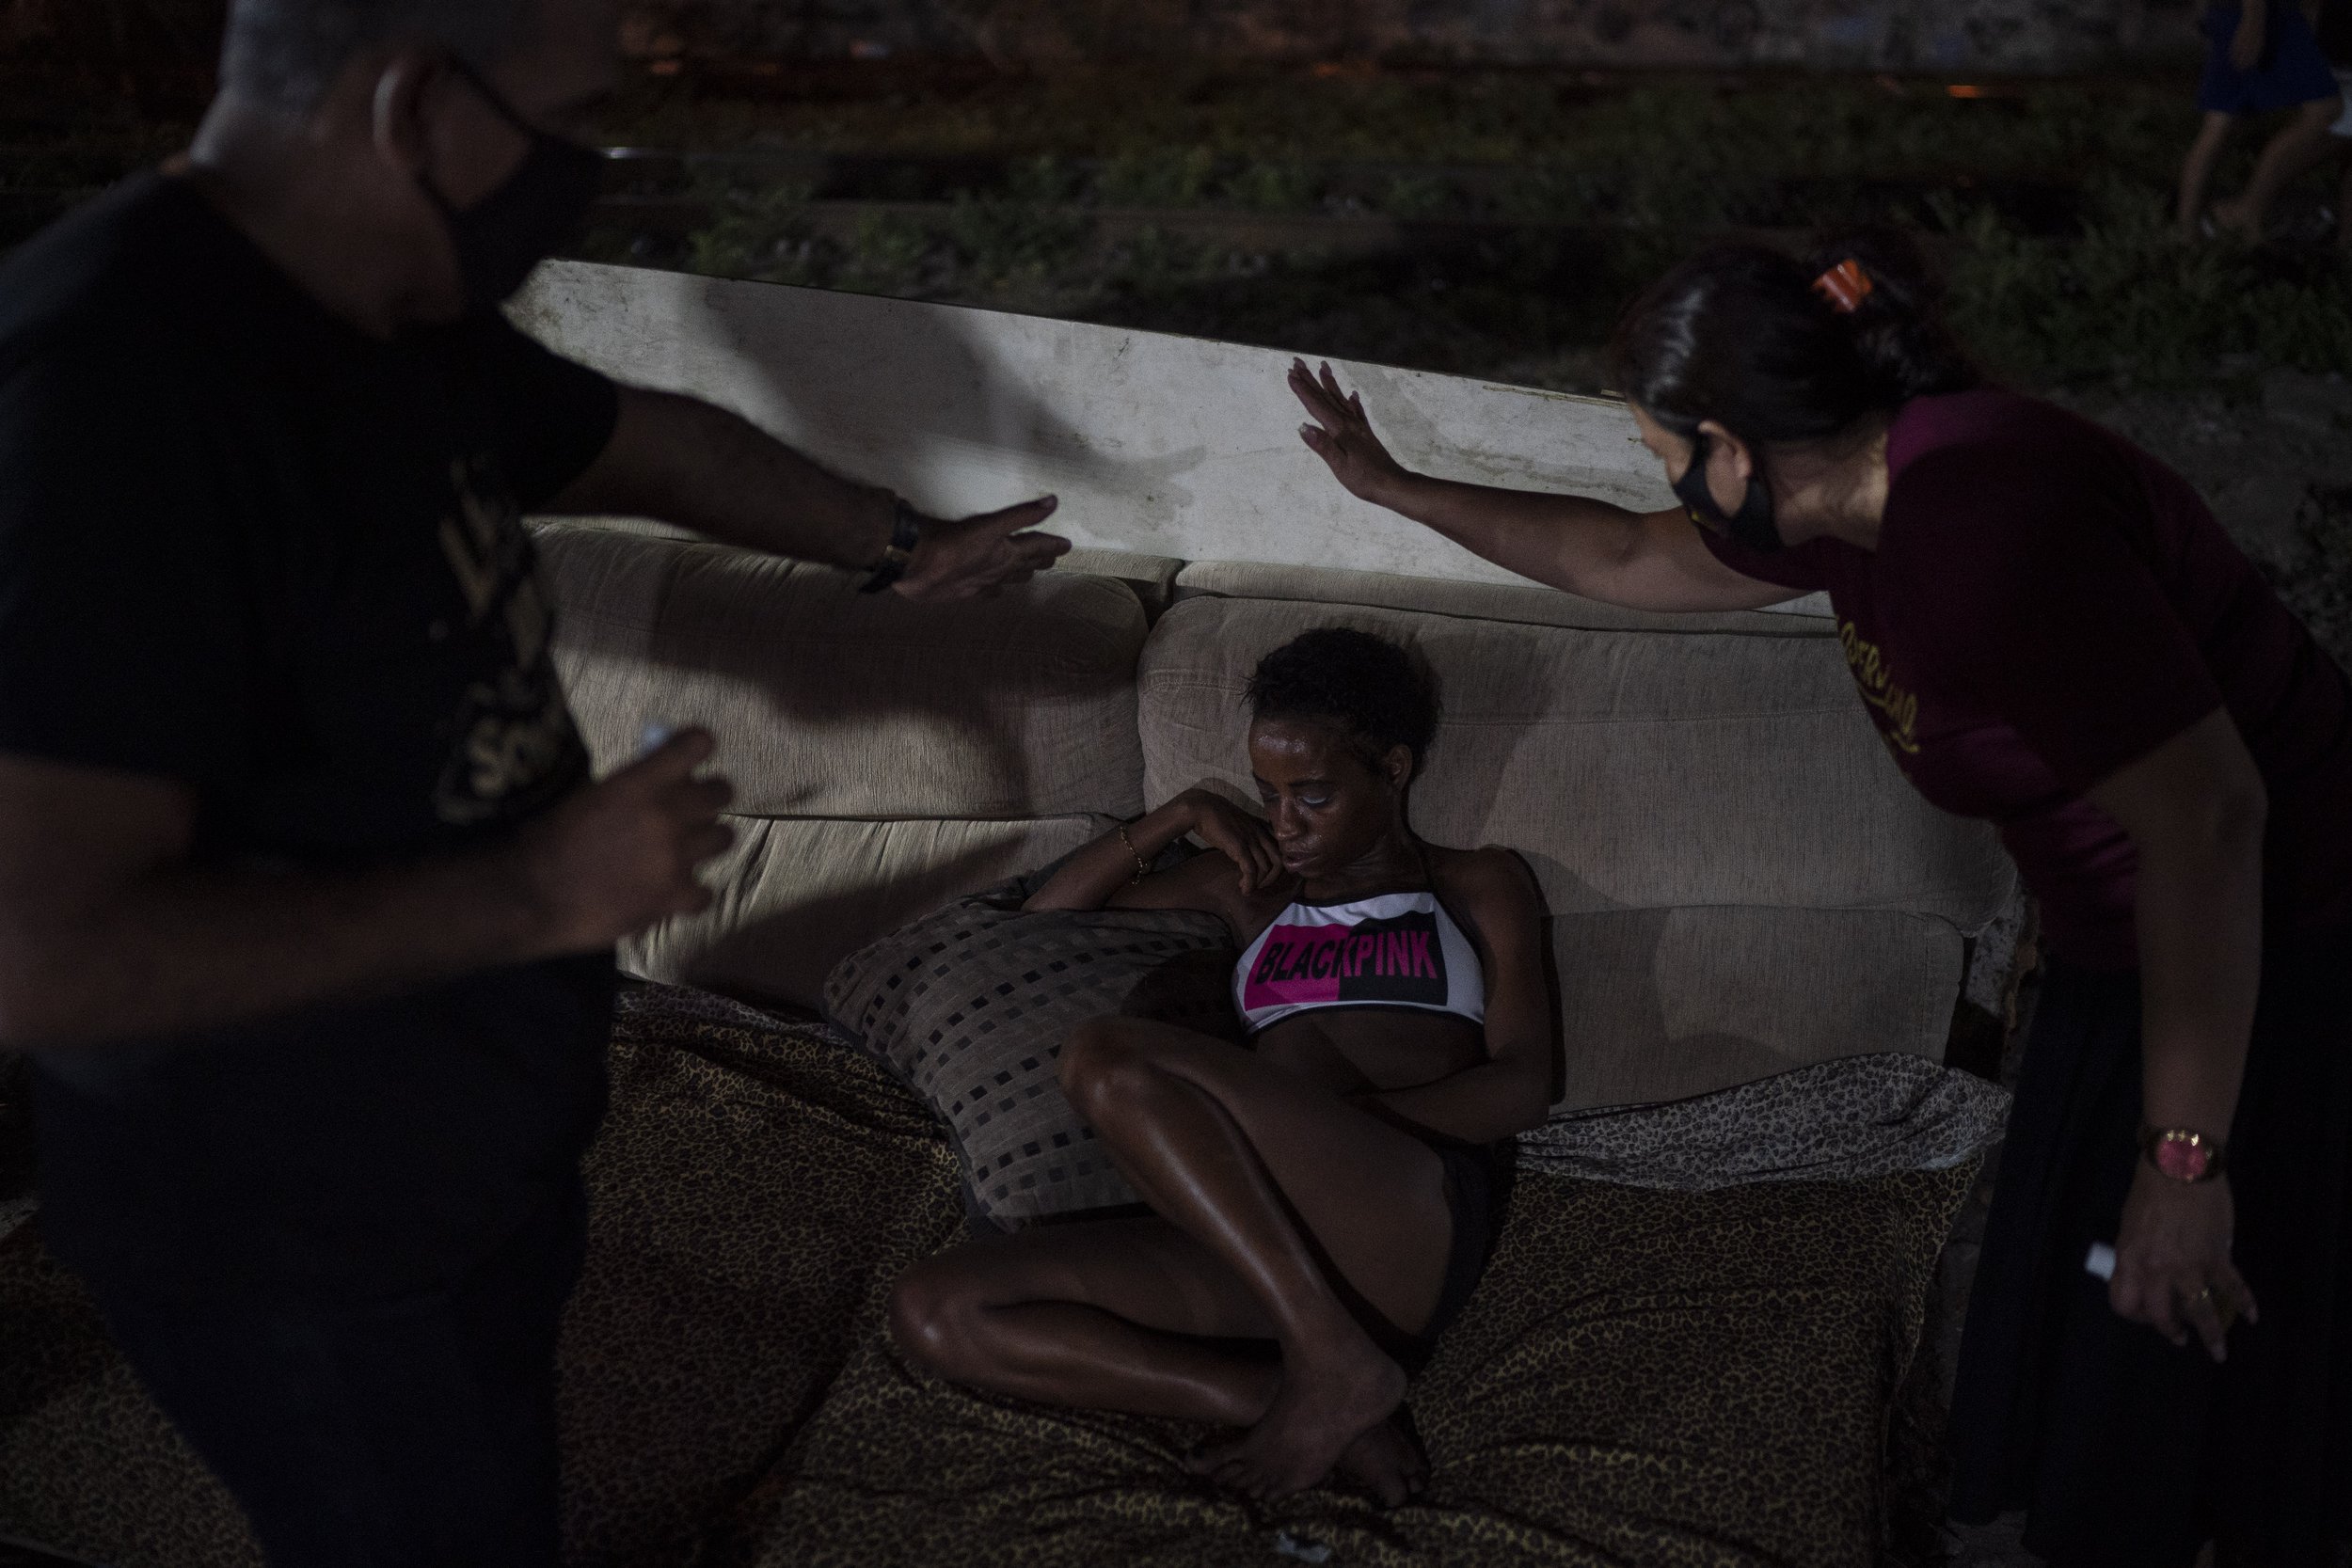  Members of the God's Love Evangelical Church and Rehab Center pray for a drug addict in an area known as “cracolandia” or crackland, in Rio de Janeiro, Brazil, on March 19, 2021. (AP Photo/Felipe Dana) 